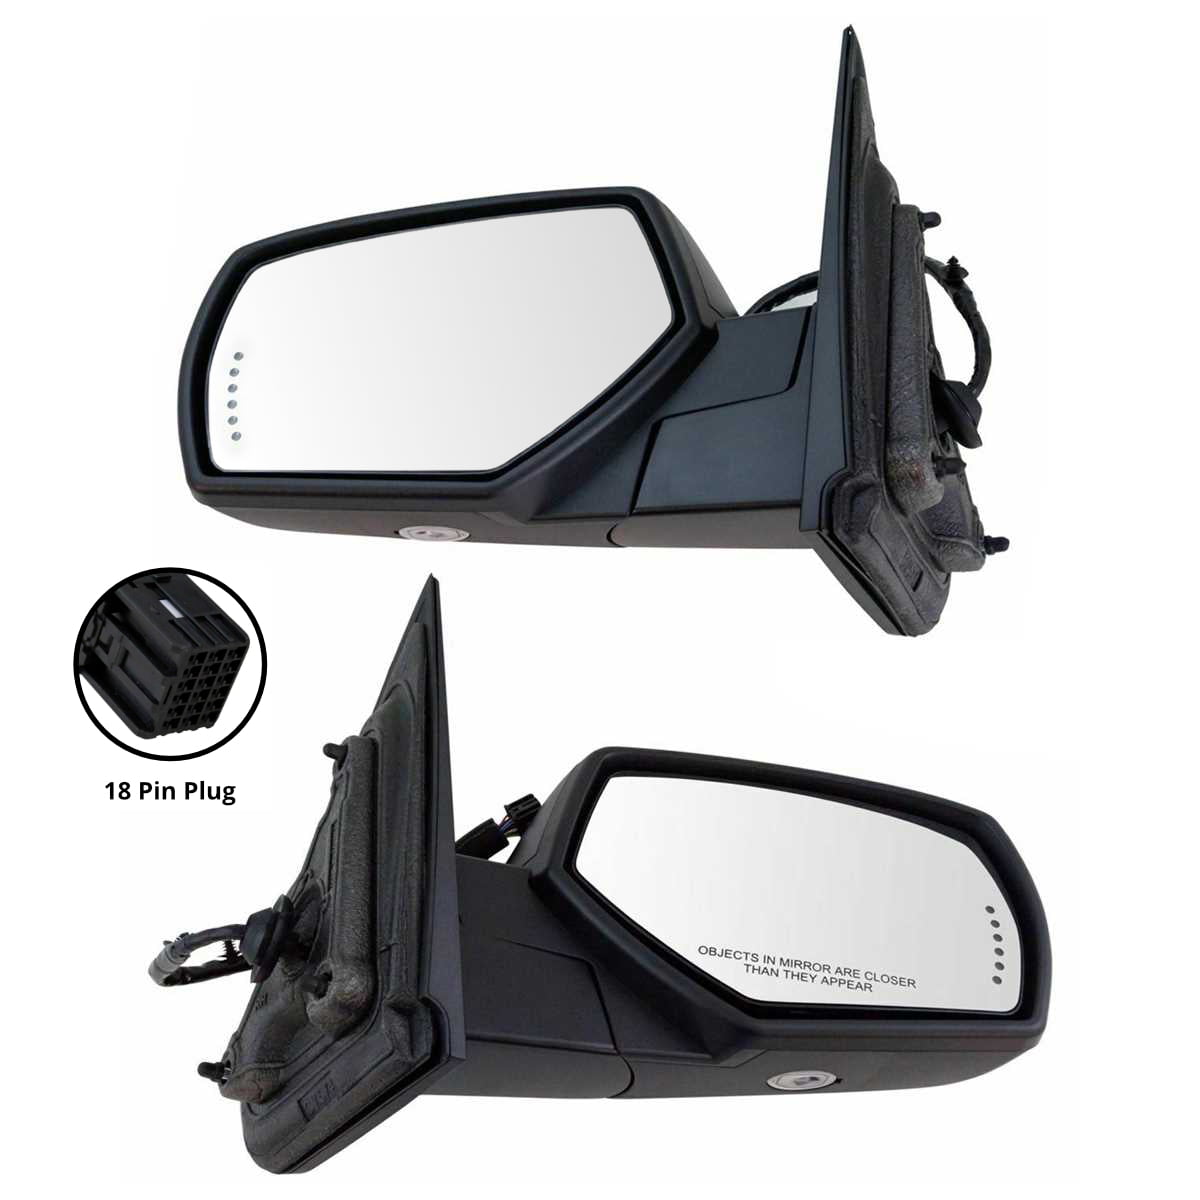 Kool Vue Power Mirror compatible with Chevy Silverado/Sierra 99-07 Right and Left Side Manual Folding Heated and Signal Light W/Puddle Light Paintable Includes 2007 Classic 